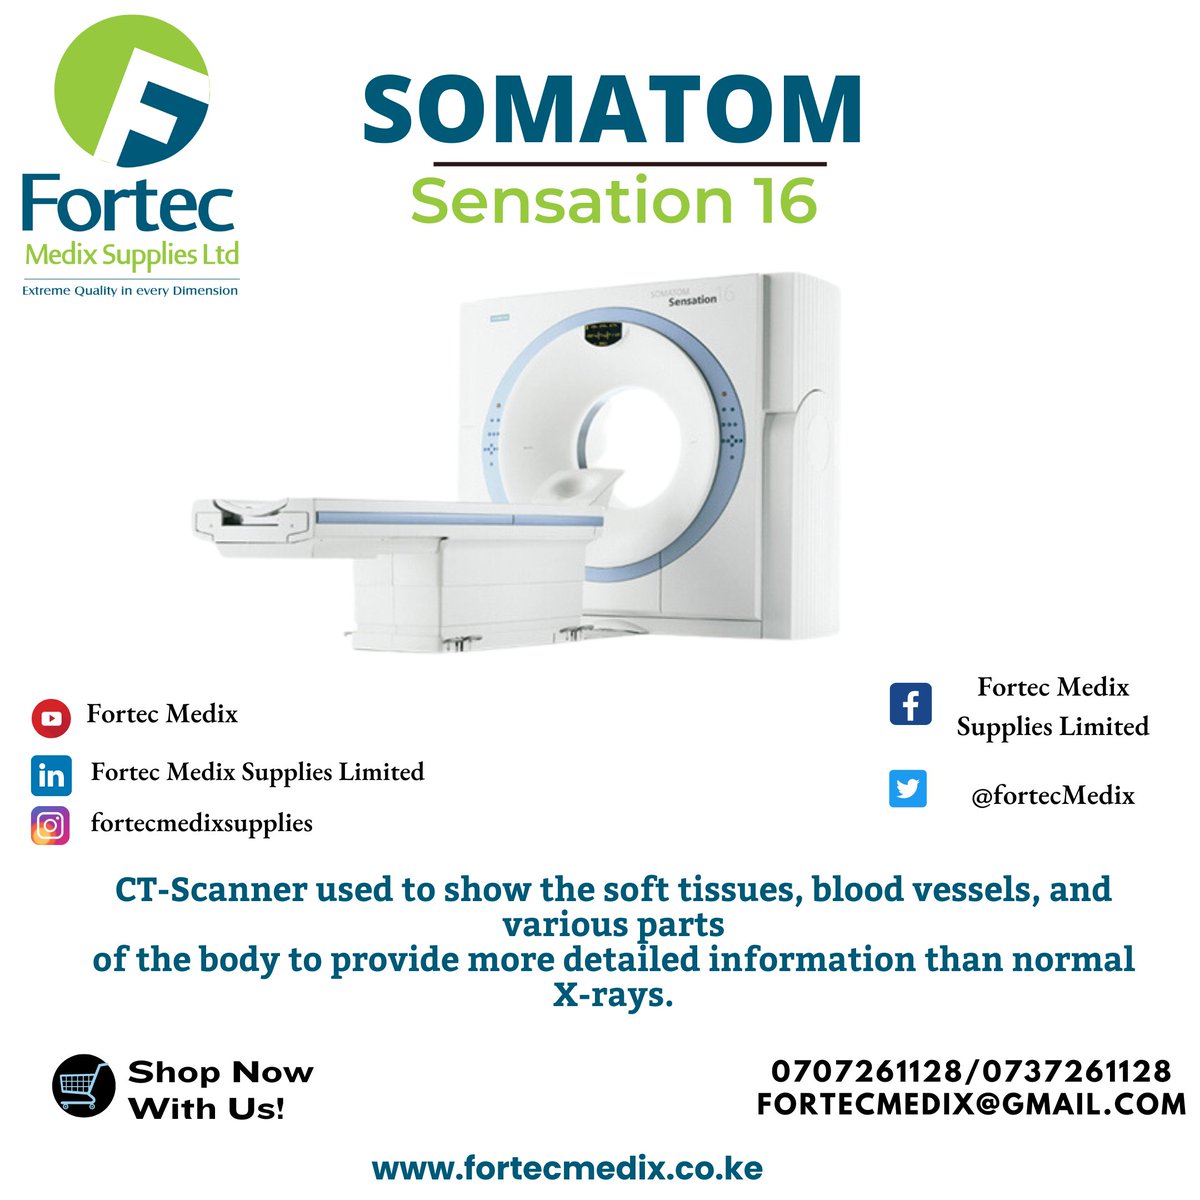 Experience the cutting-edge technology of the Somatom Sensation 16 CT Scanner. Find this state-of-the-art machine at Fortec Medix Supplies for all your medical imaging needs.
'Extreme Quality in Every Dimension'

#Fortec #fortecmedix  #ctscan #petctscan #3dctscan #radiology